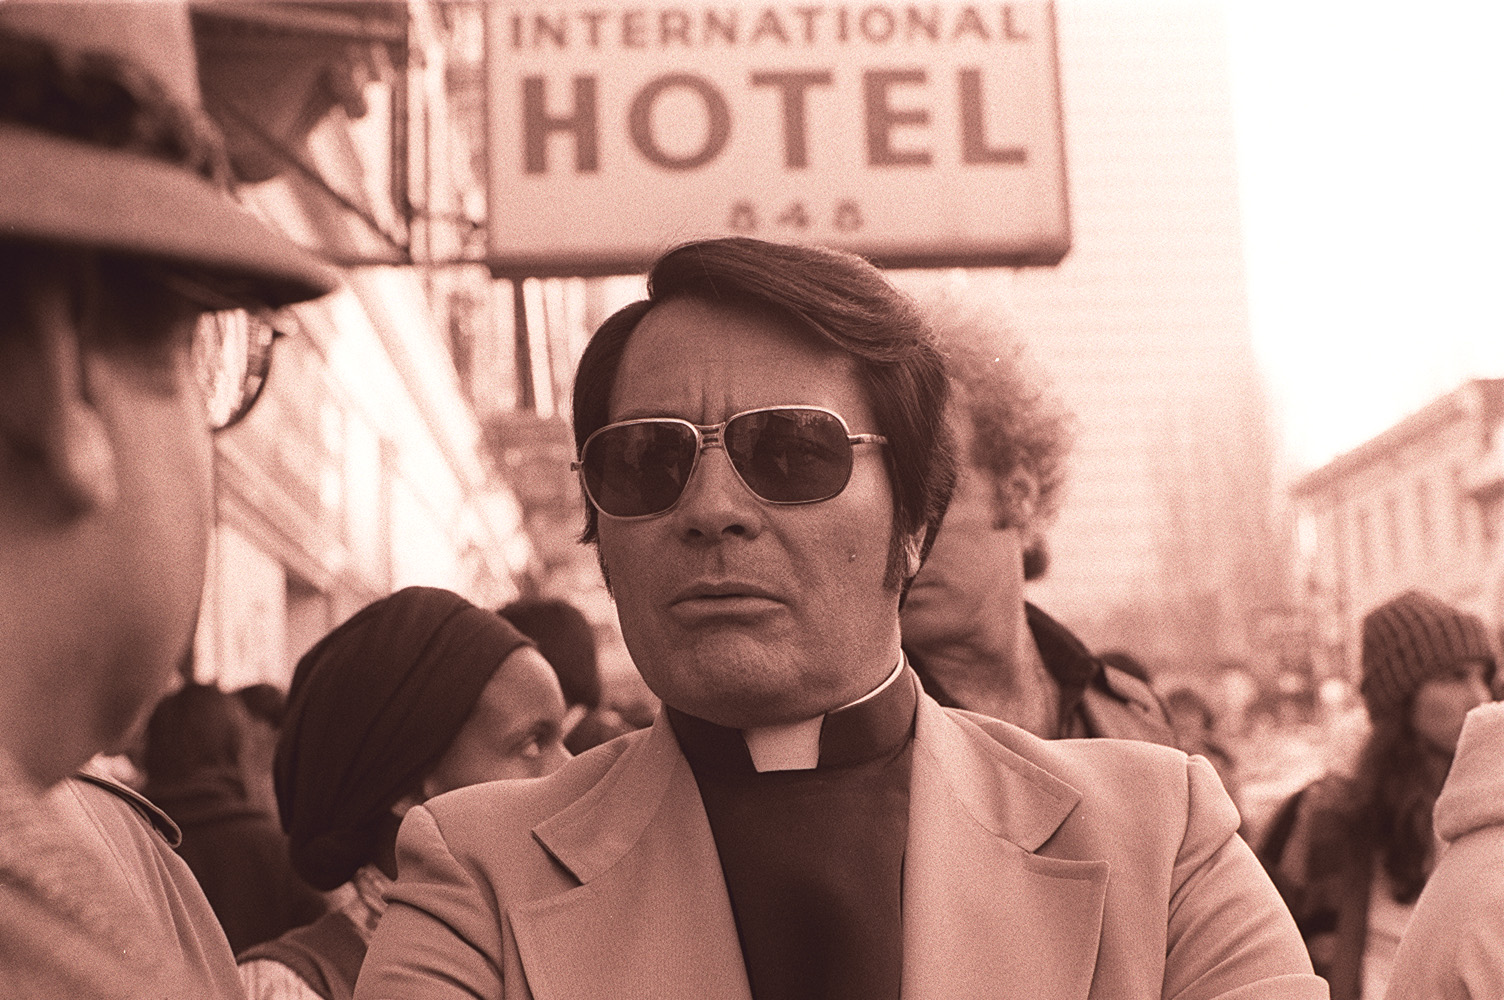 Monochrome photograph of cult leader Jim Jones wearing sports jacket and priests collar